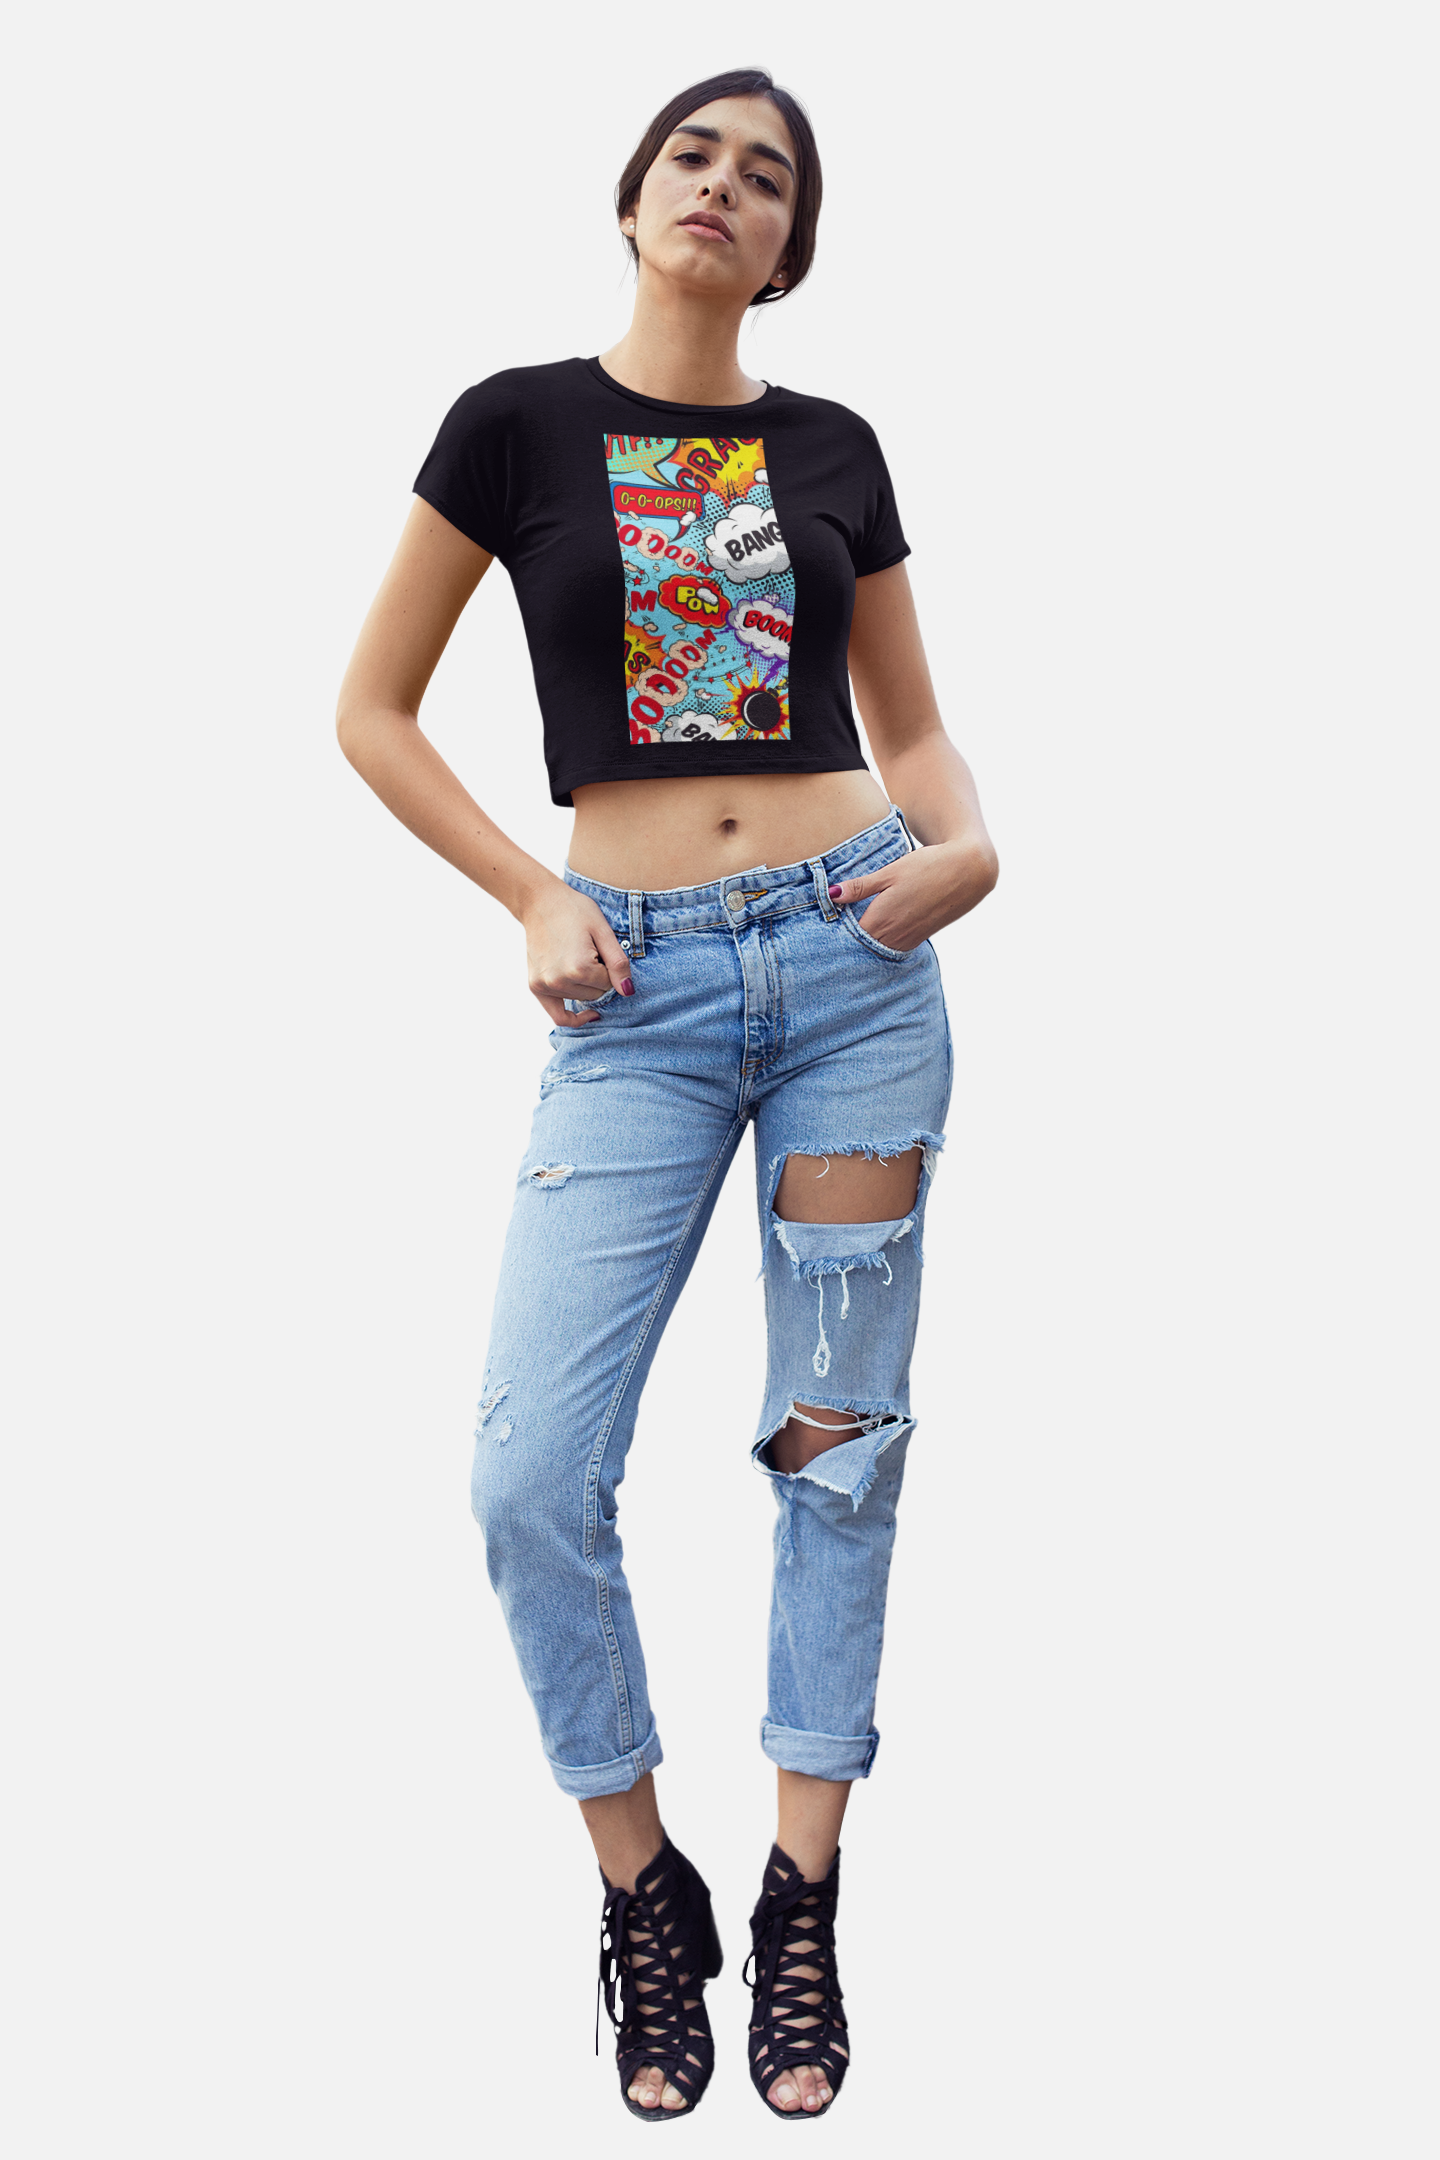 Comic Quotes Black Crop Top For Women